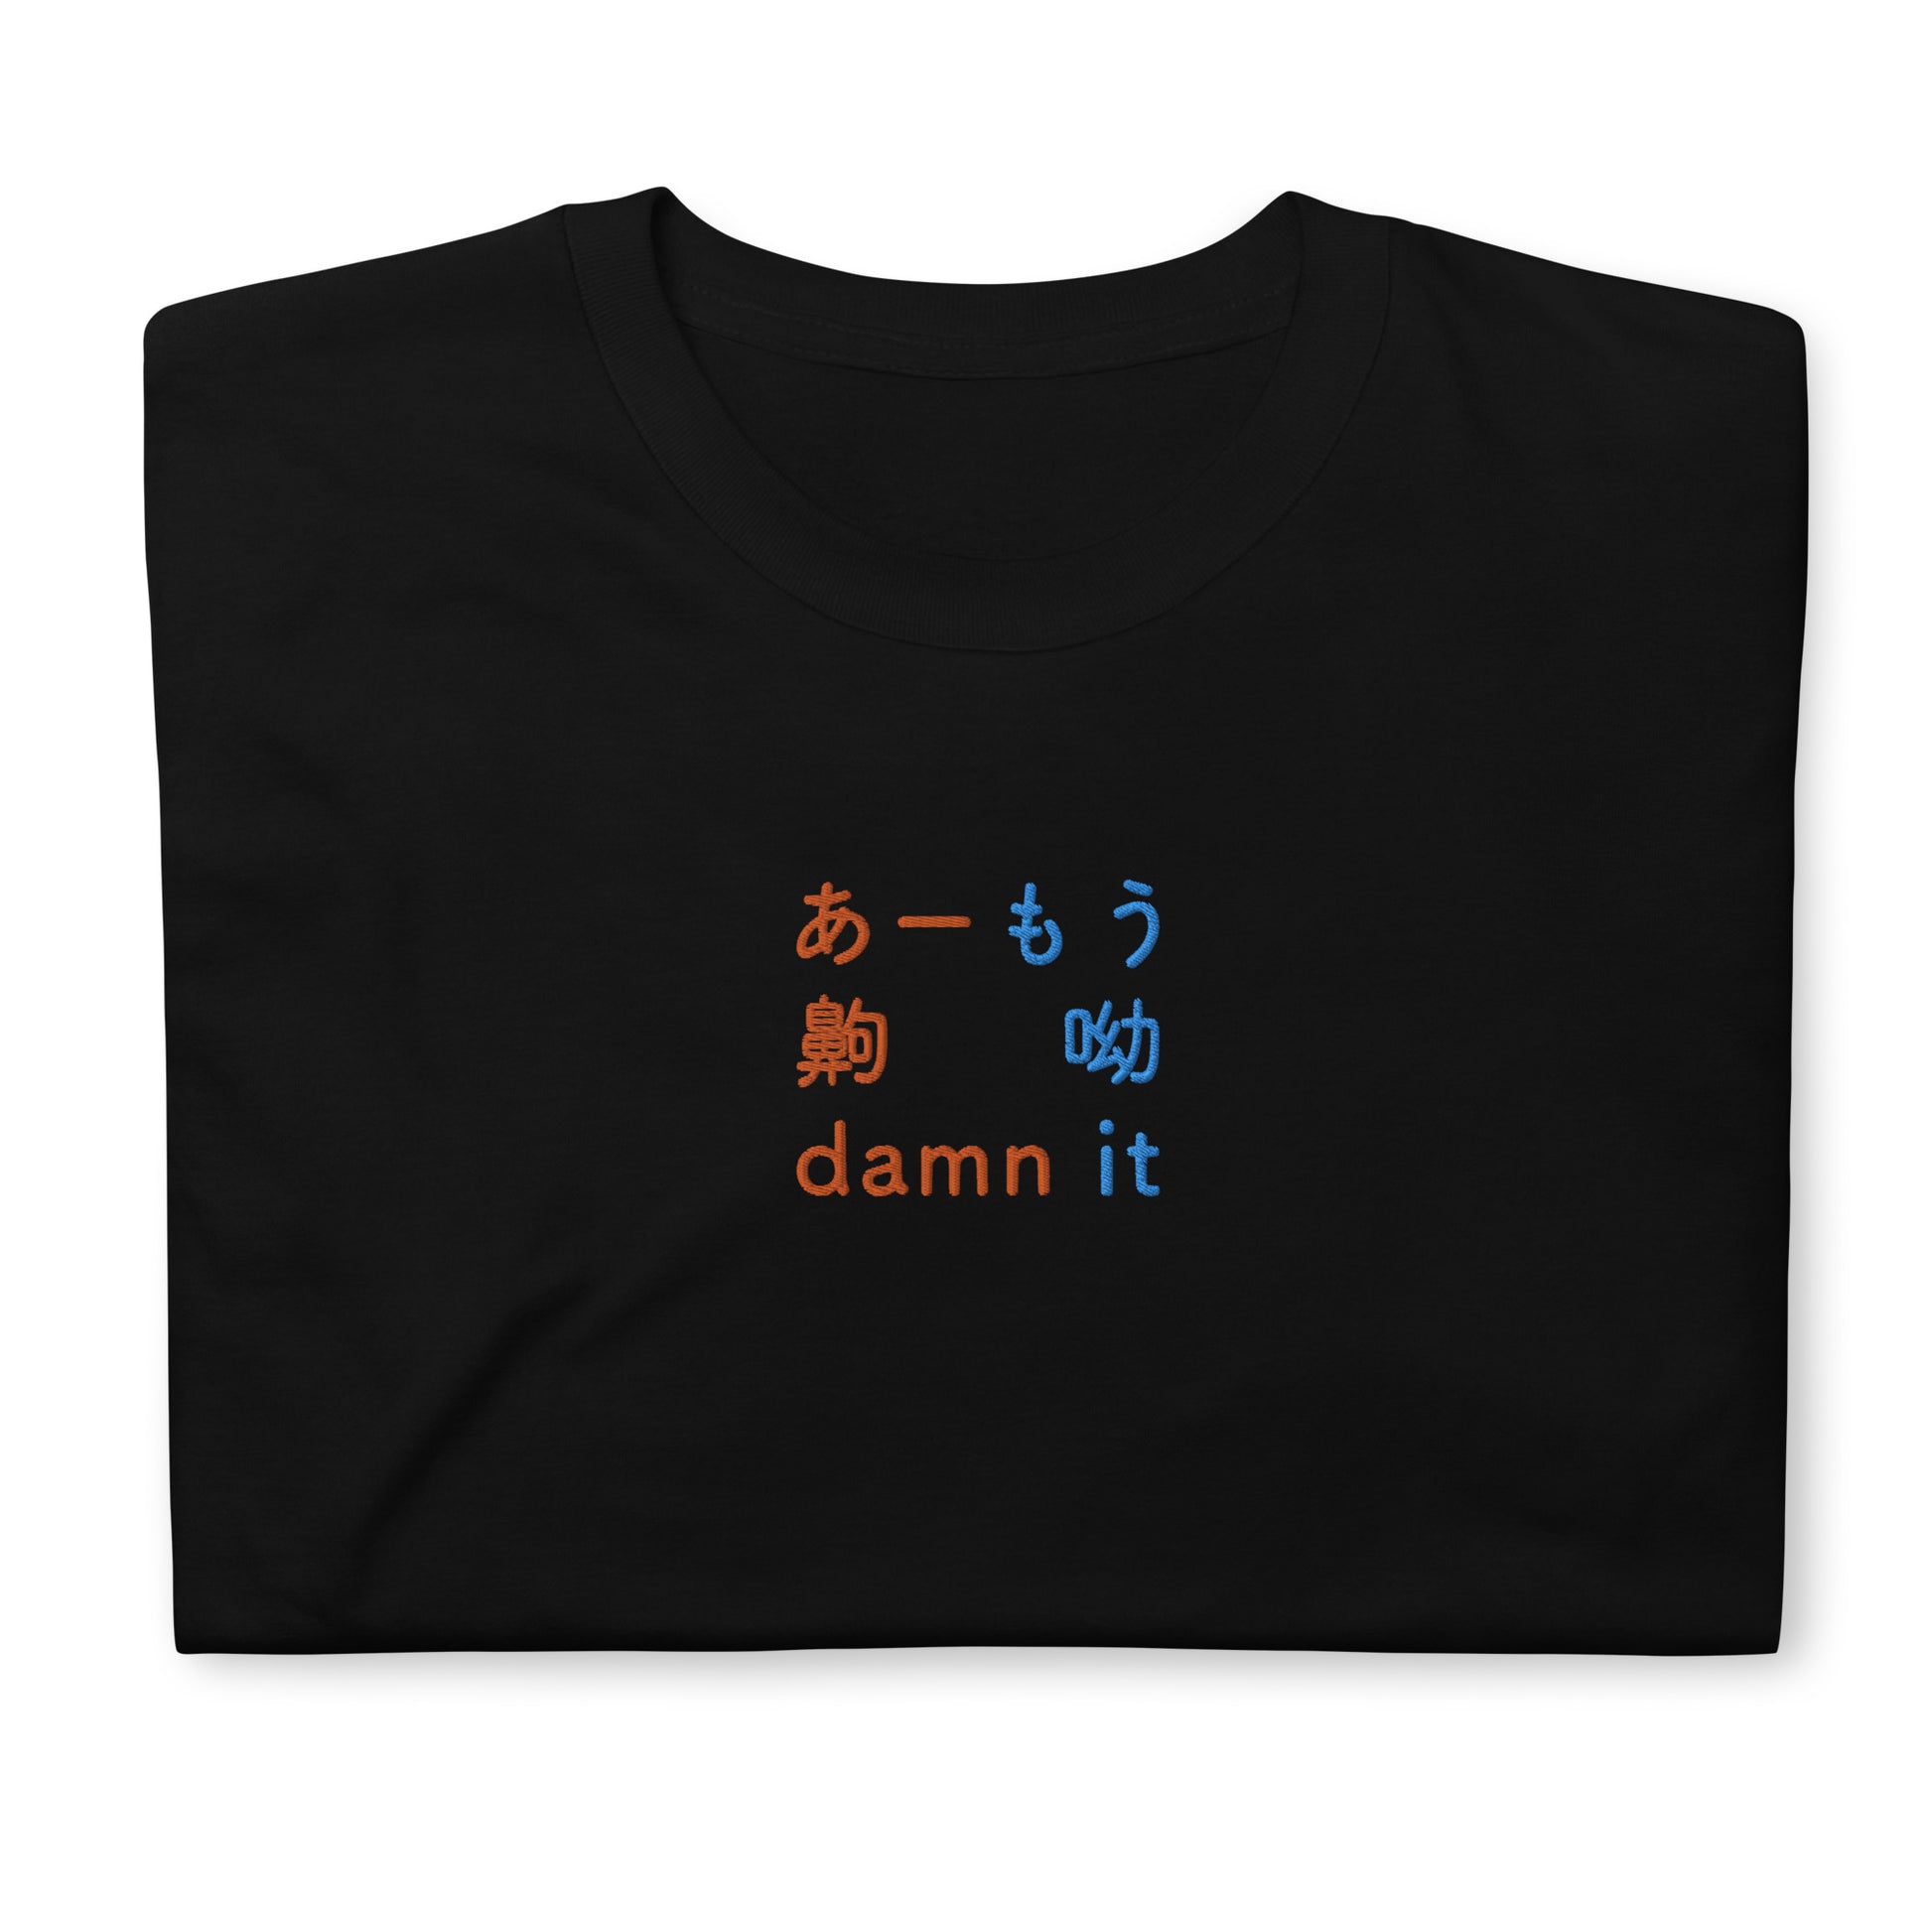 Black High Quality Tee - Front Design with an Orange,Blue Embroidery "Damn it" in Japanese,Chinese and English